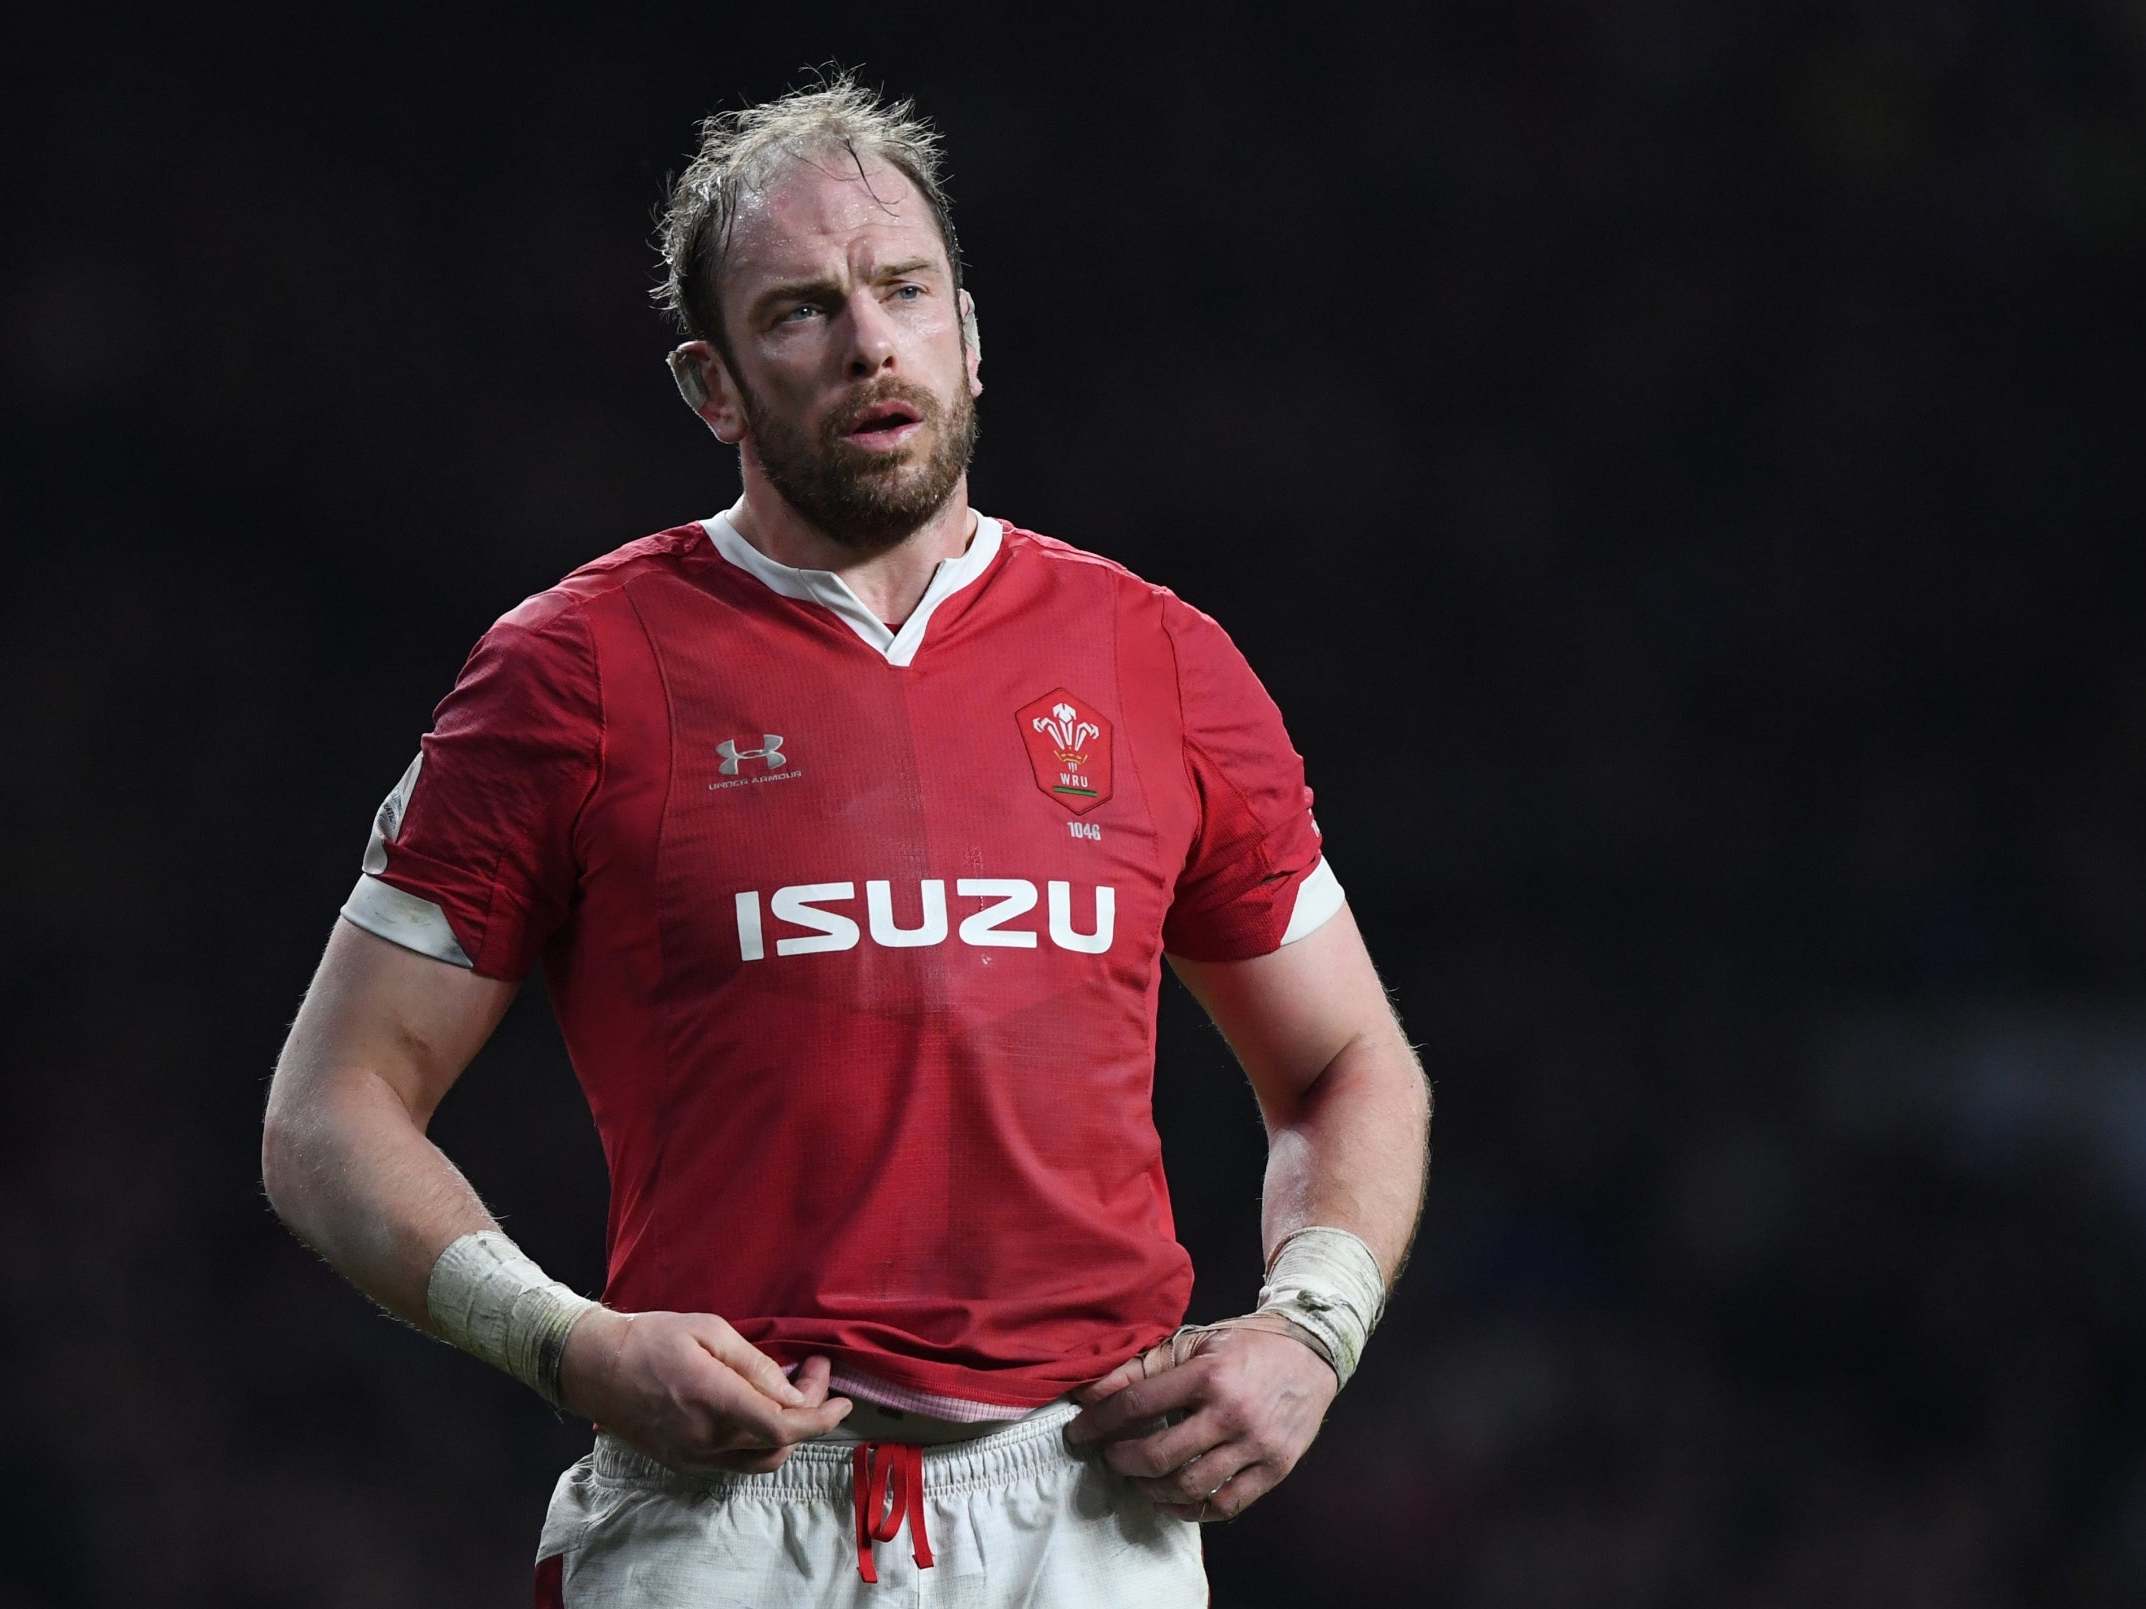 Alun Wyn Jones Urges World Rugby To Act After Joe Marler Grabbed His Genitalia The Independent